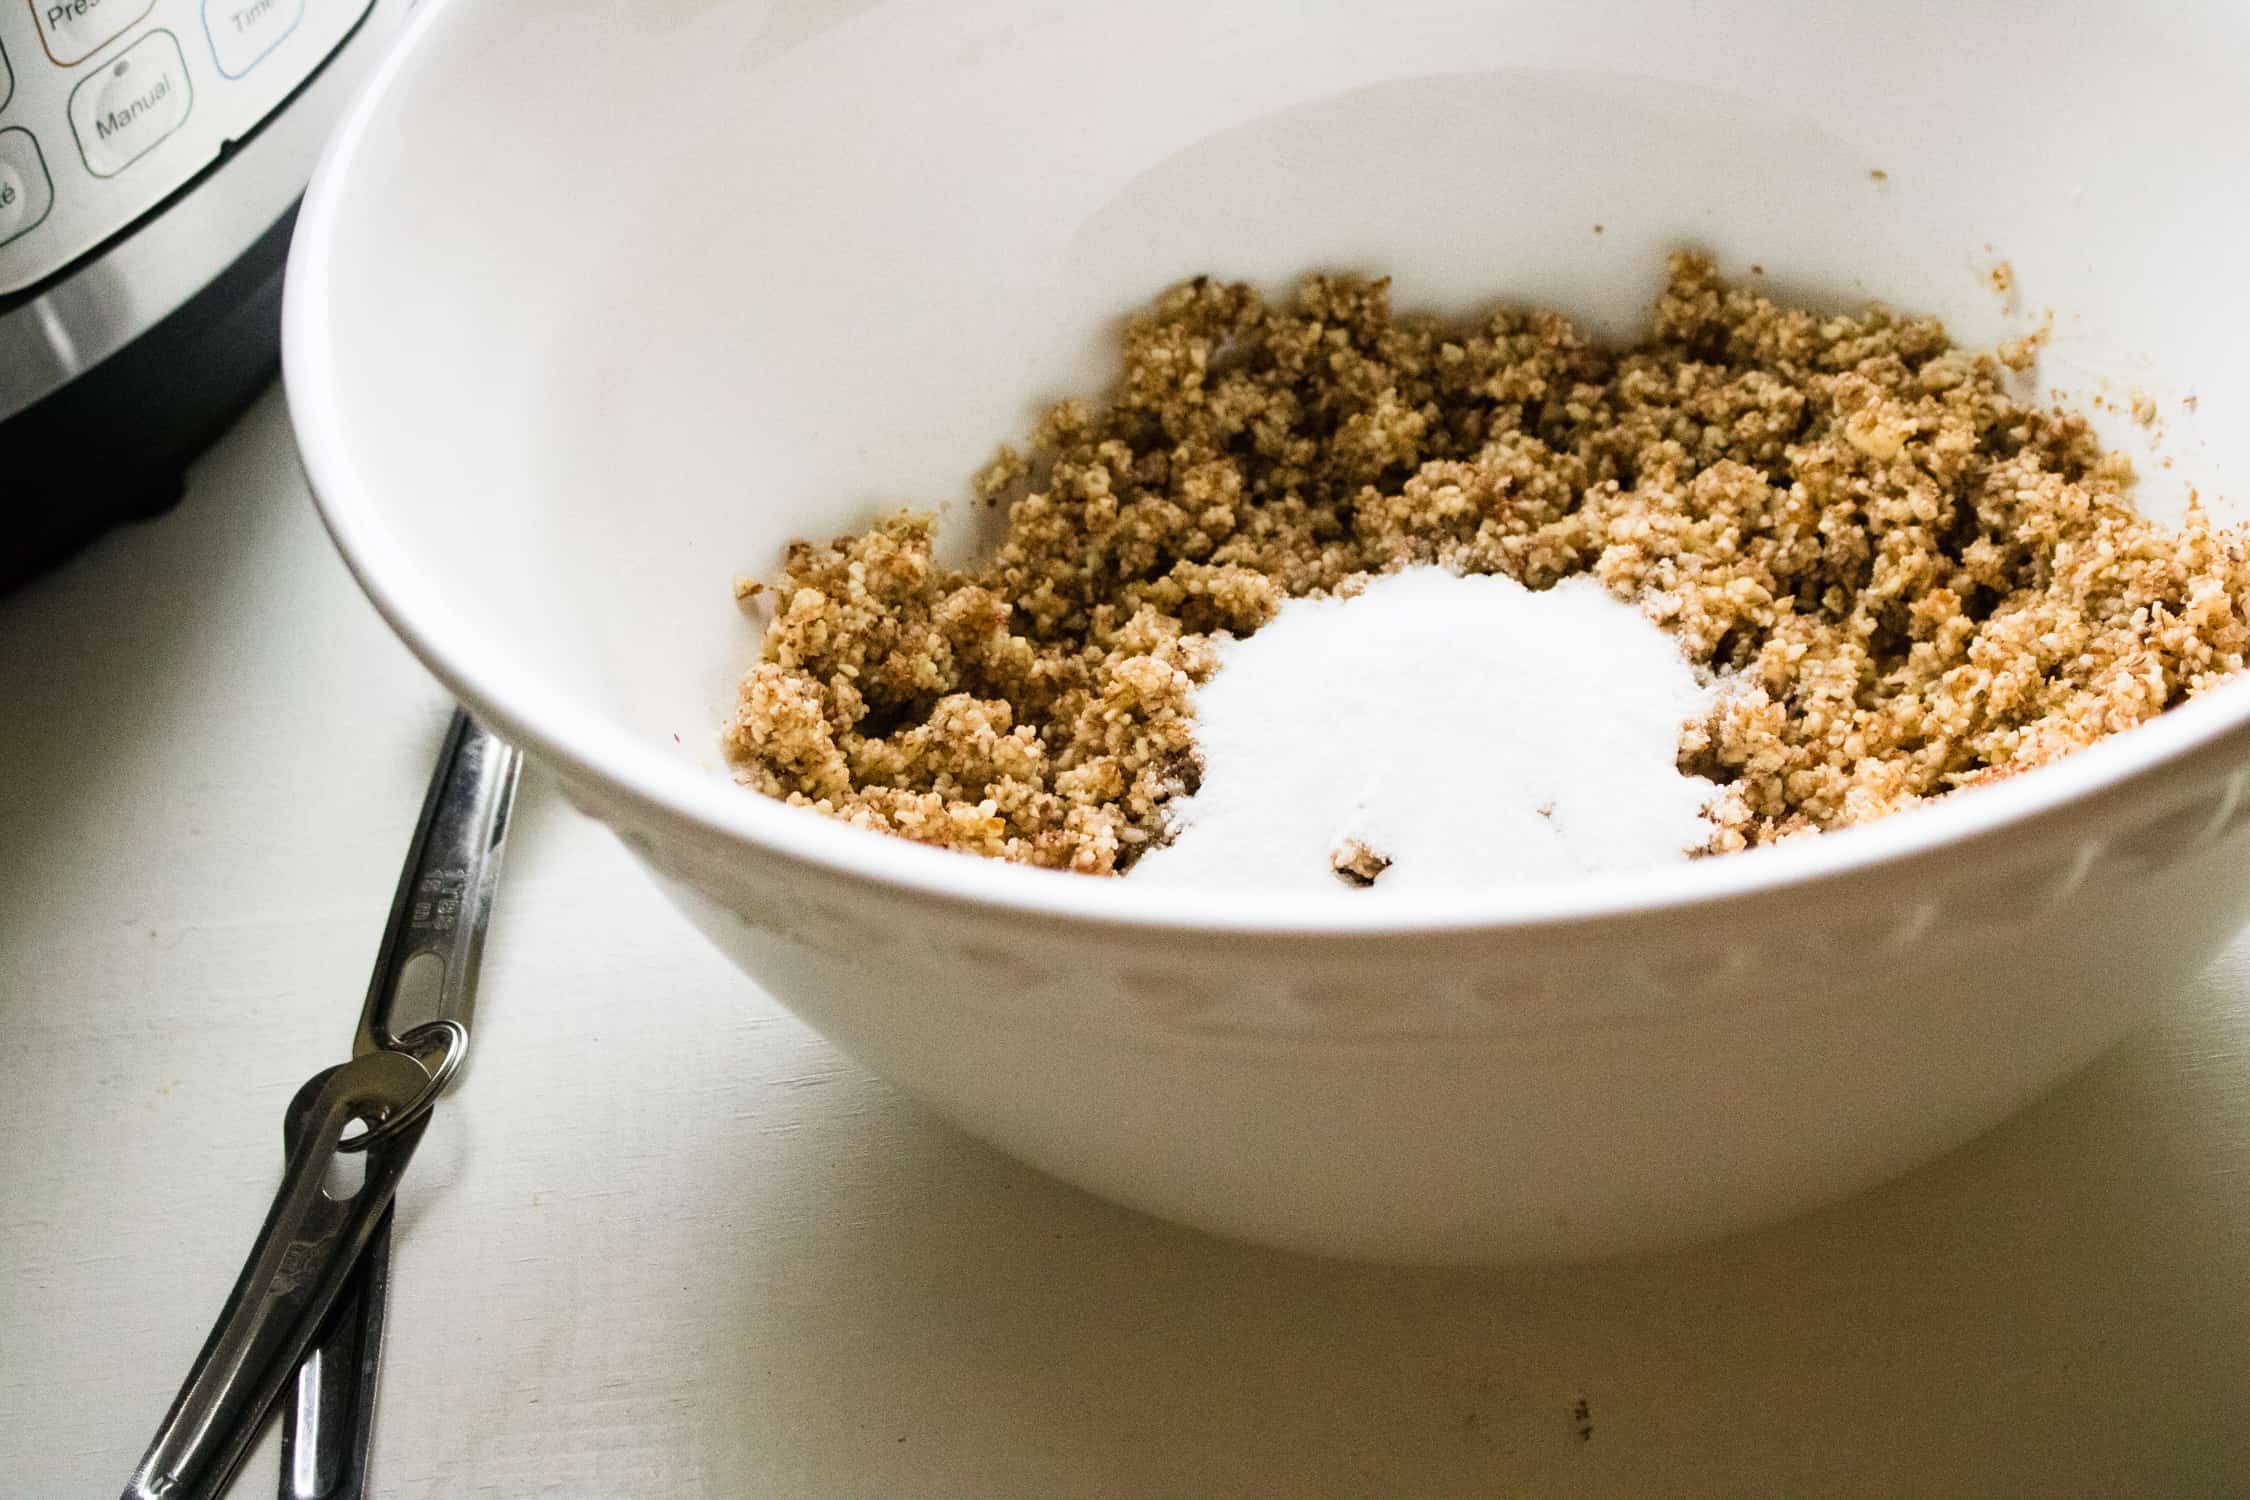 The ingredients for Instant Pot Grain-free Keto Cheesecake crust in a white mixing bowl